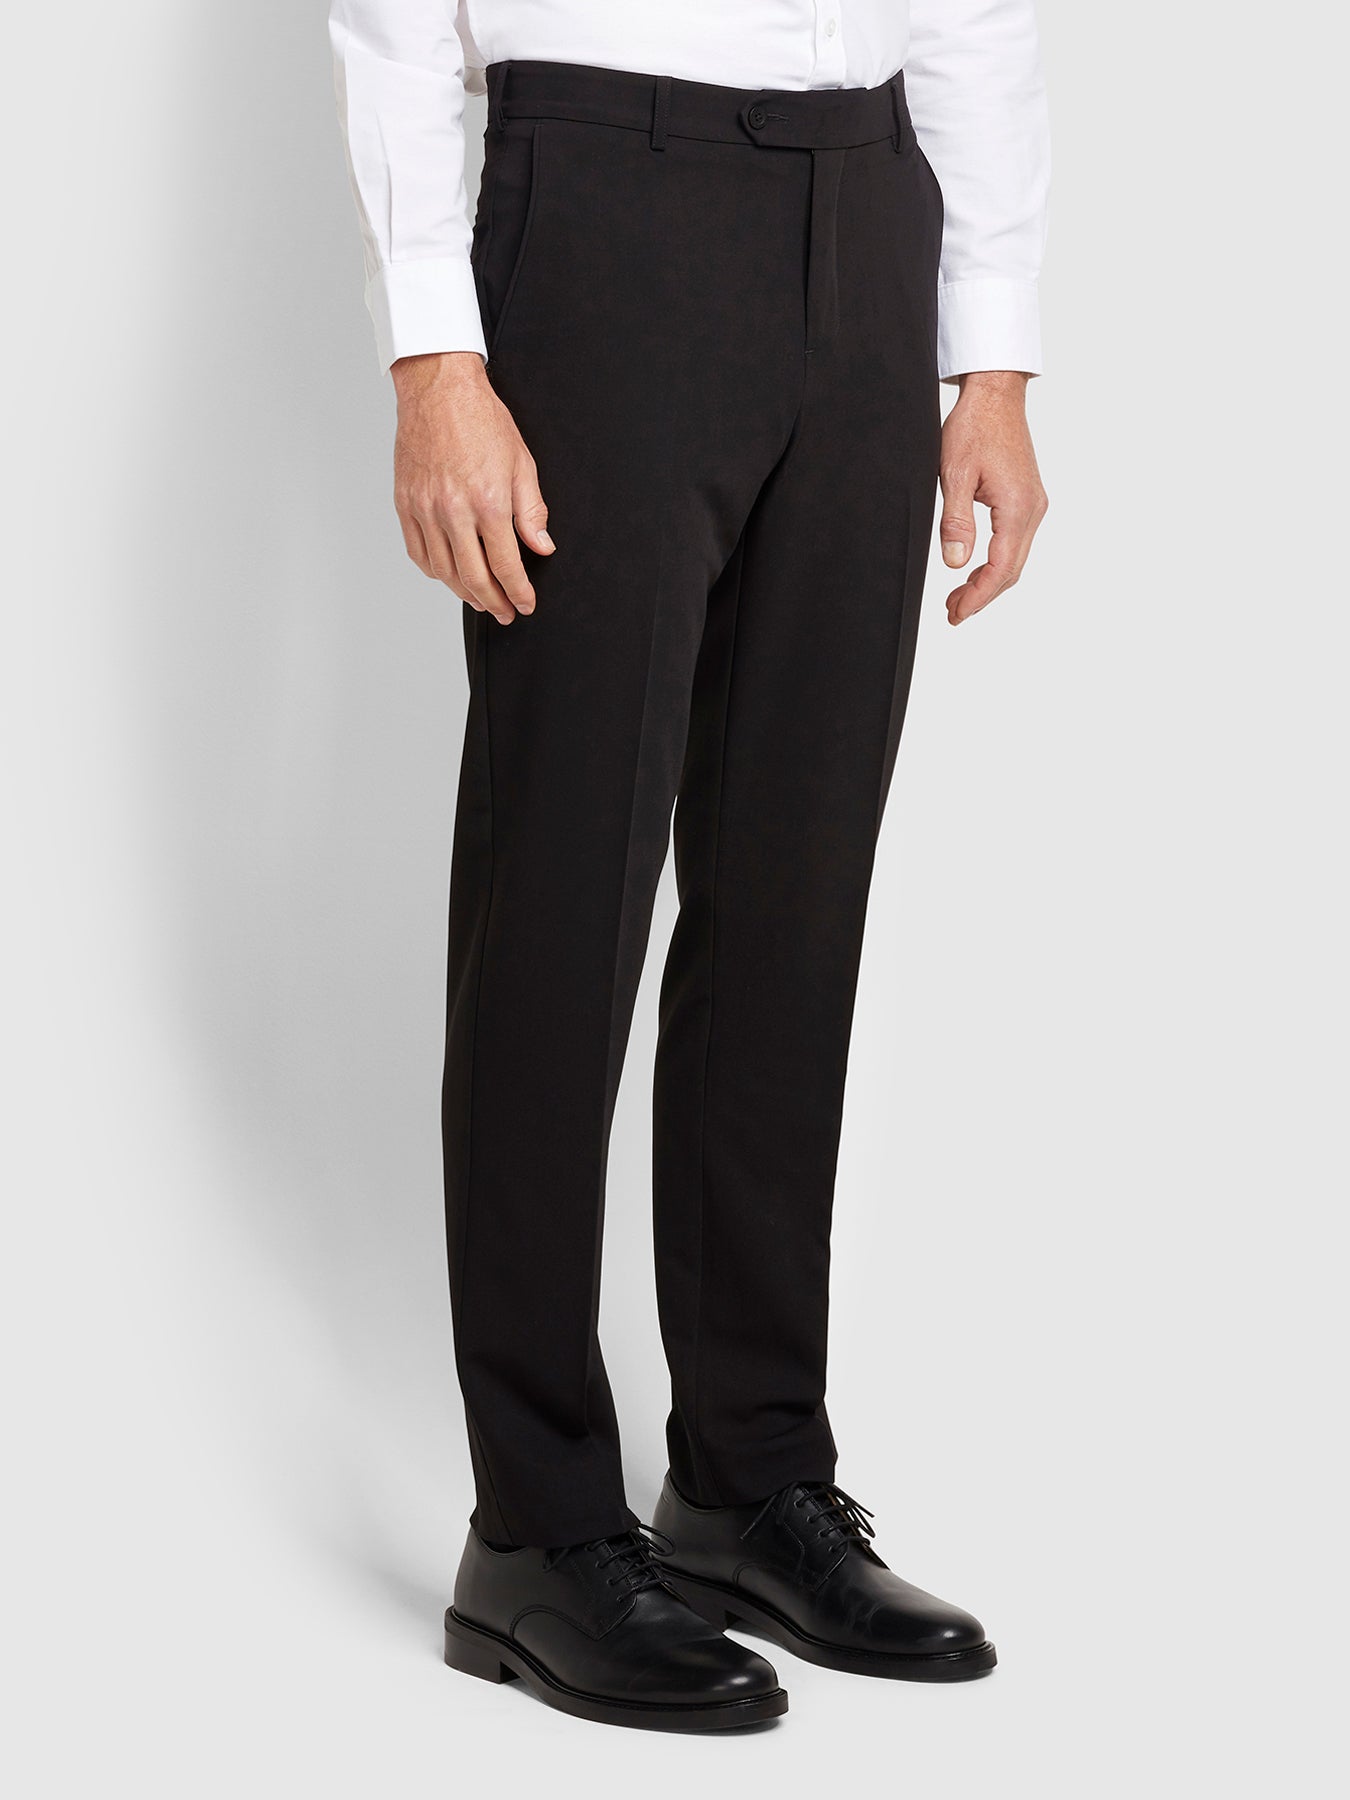 View Roachman 4 Way Stretch Trousers In Black information